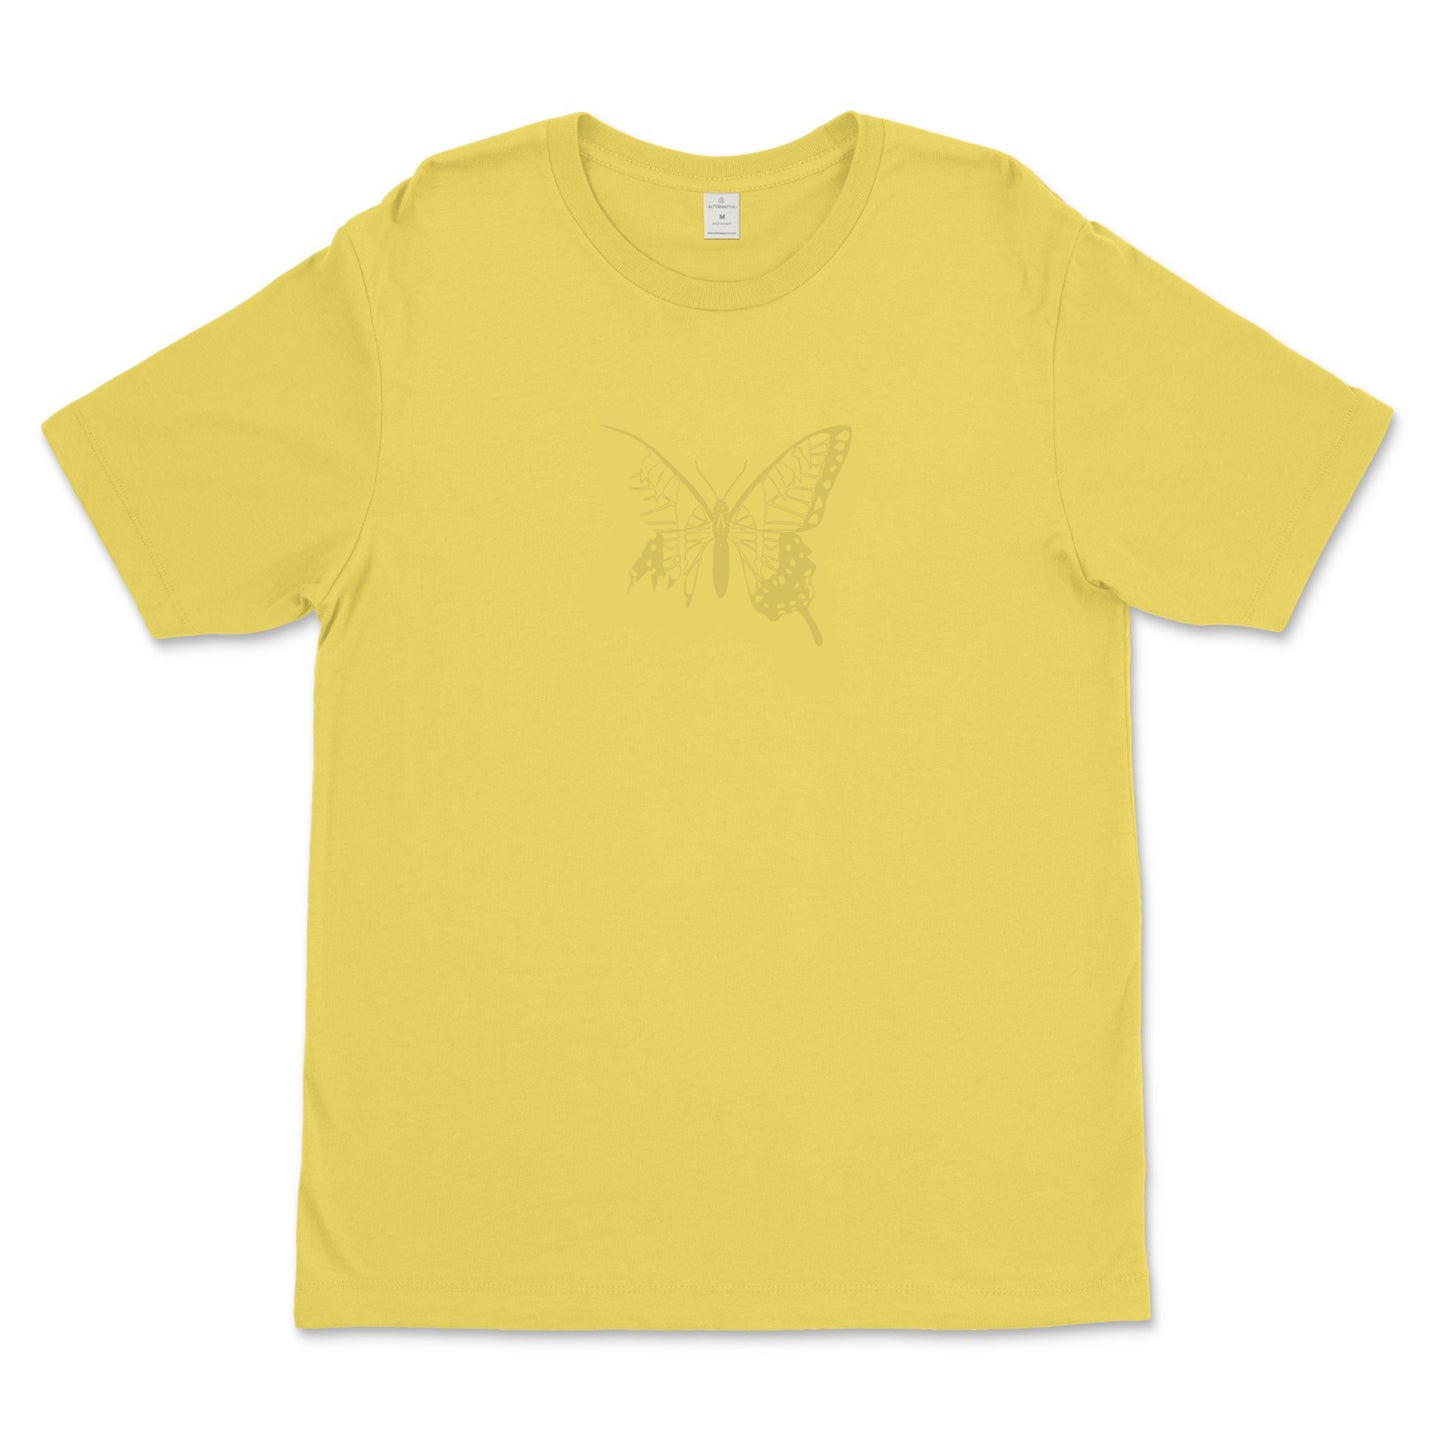 Stay Resilient "I'm The Butterfly" Tee